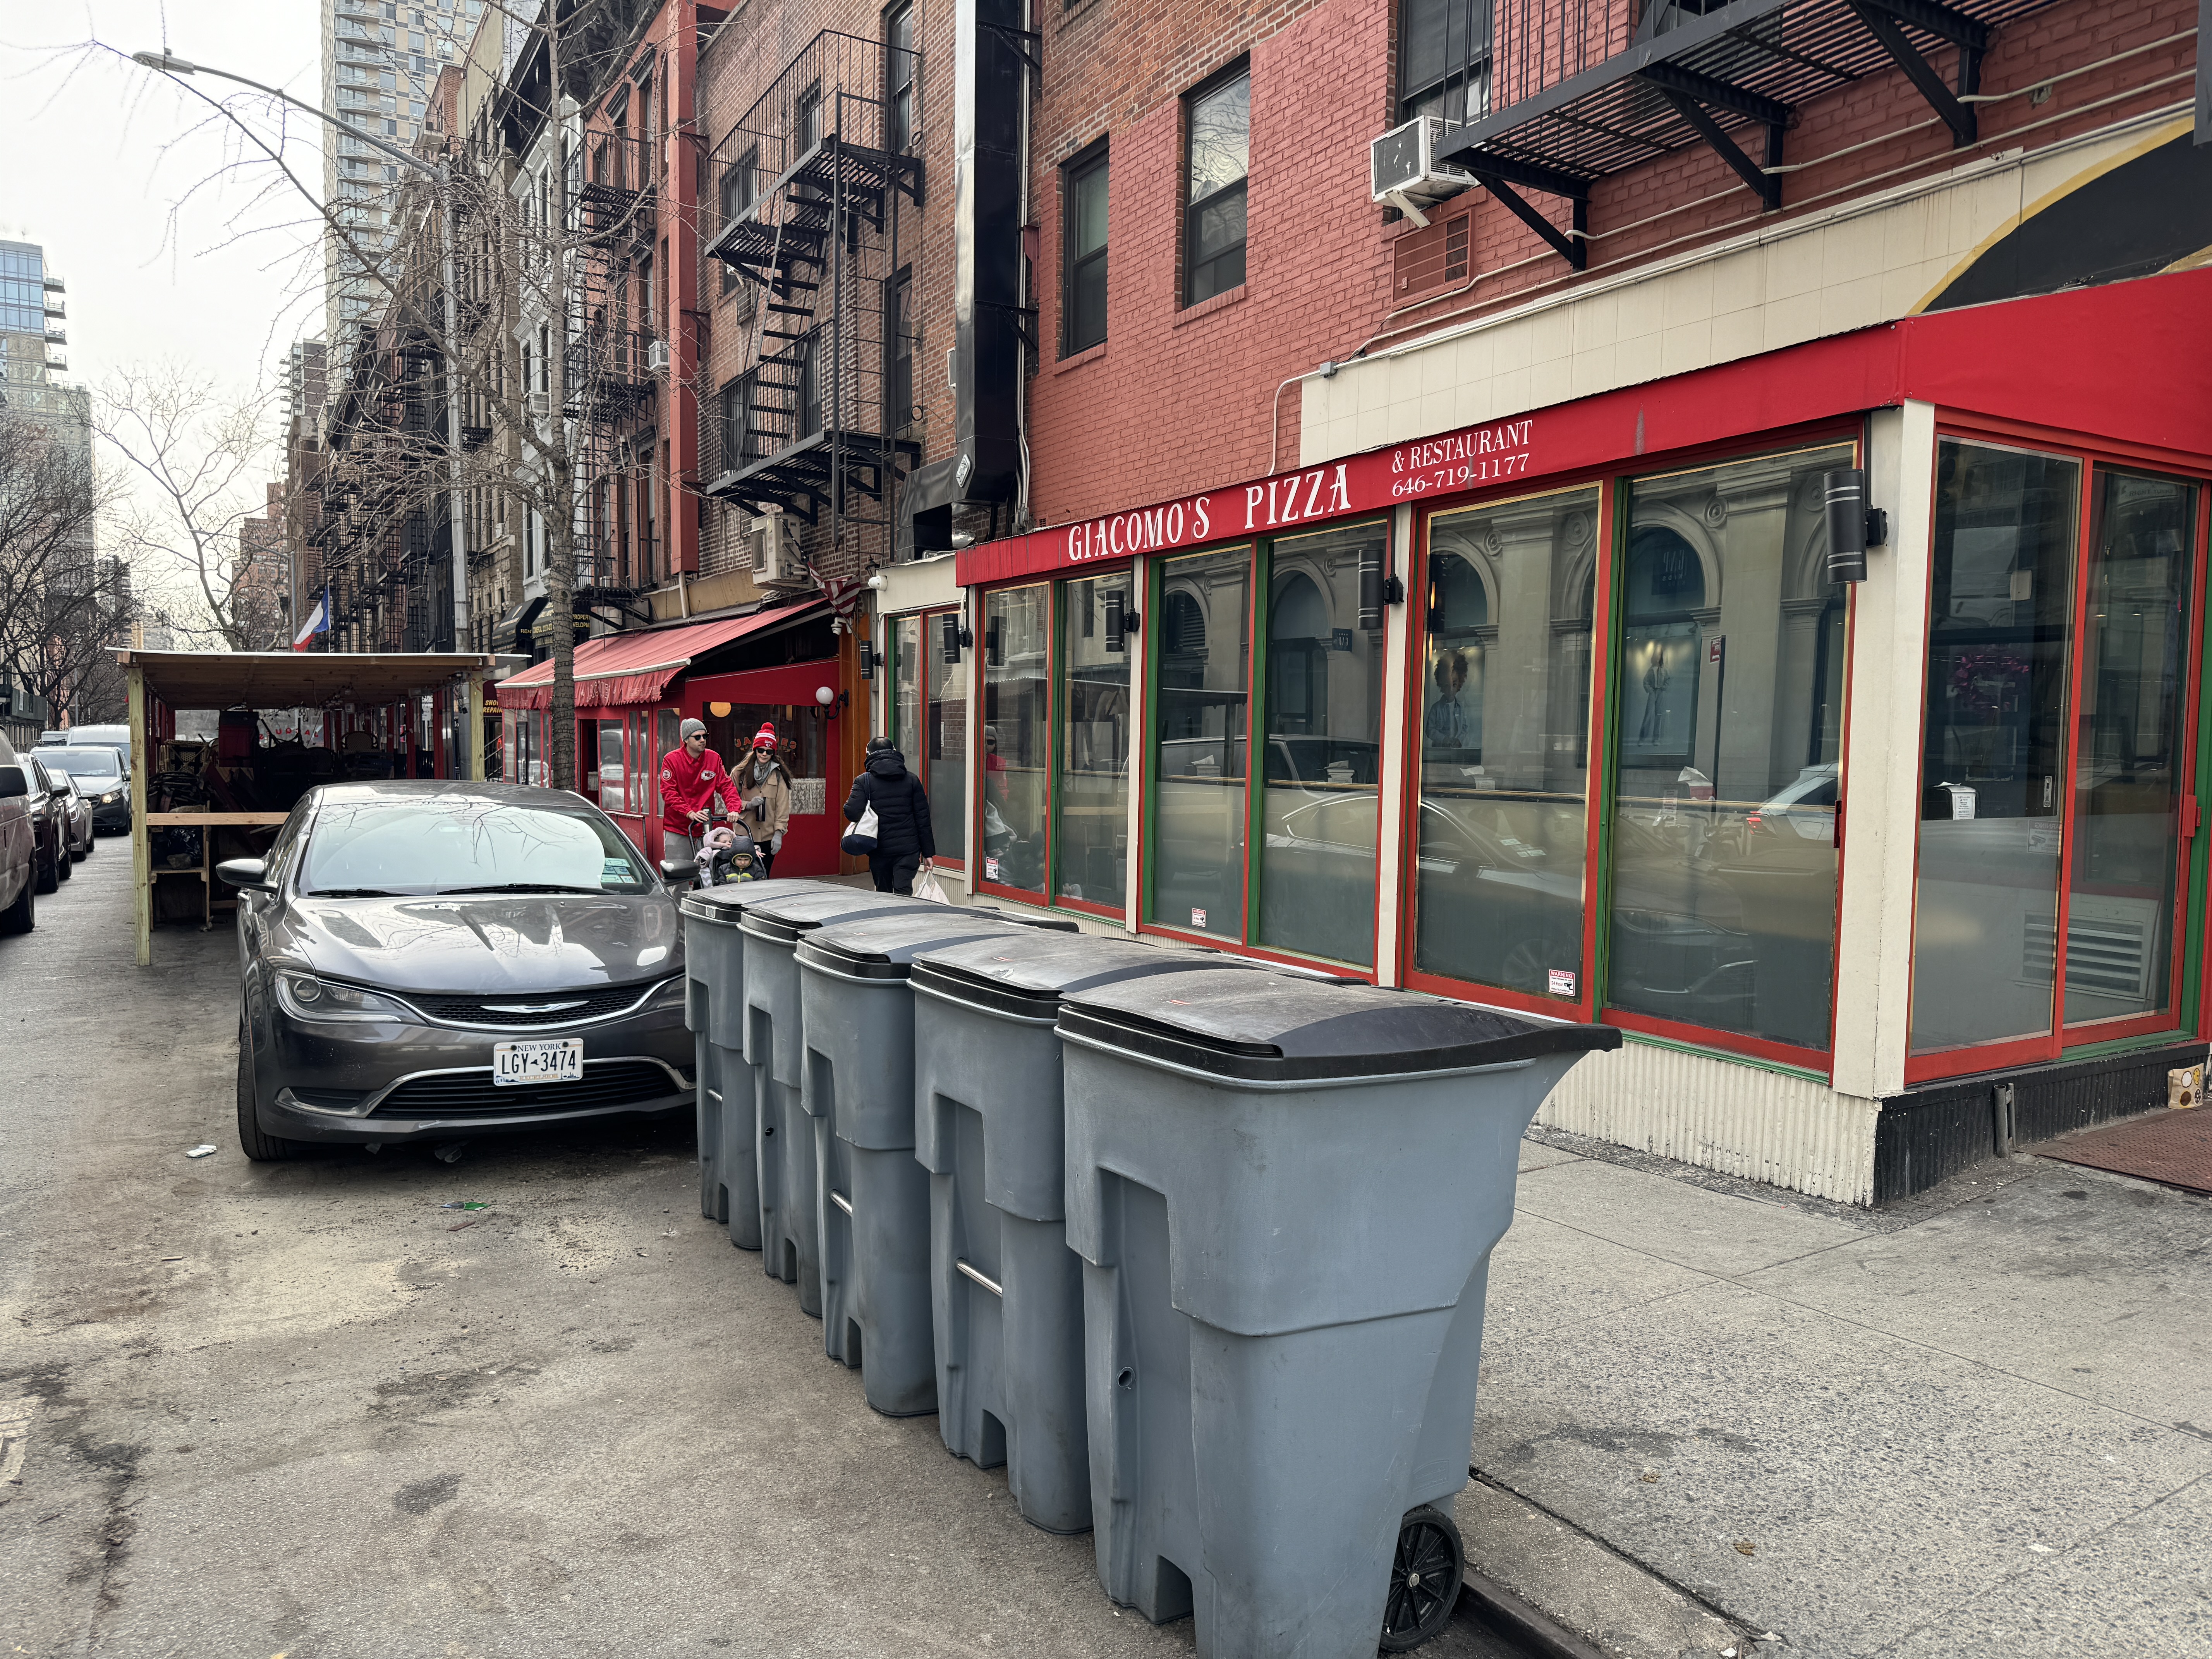 Photo shows commercial garbage cans lined up on the street in front of Giacomo's Pizza where a dining shed used to be.